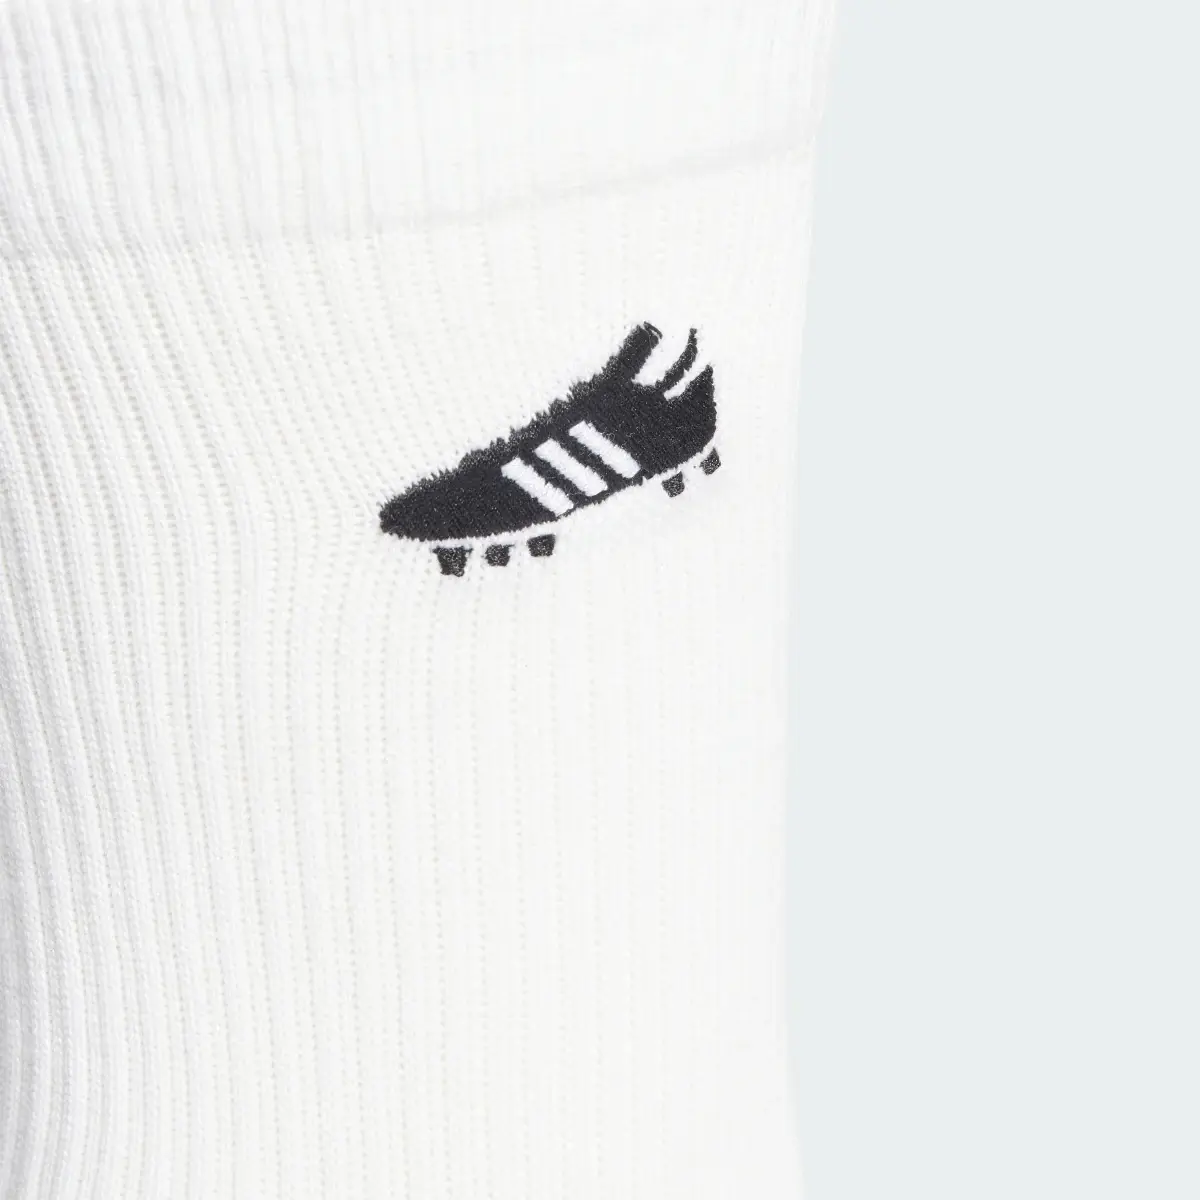 Adidas Soccer Boot Embroidered Socks. 2